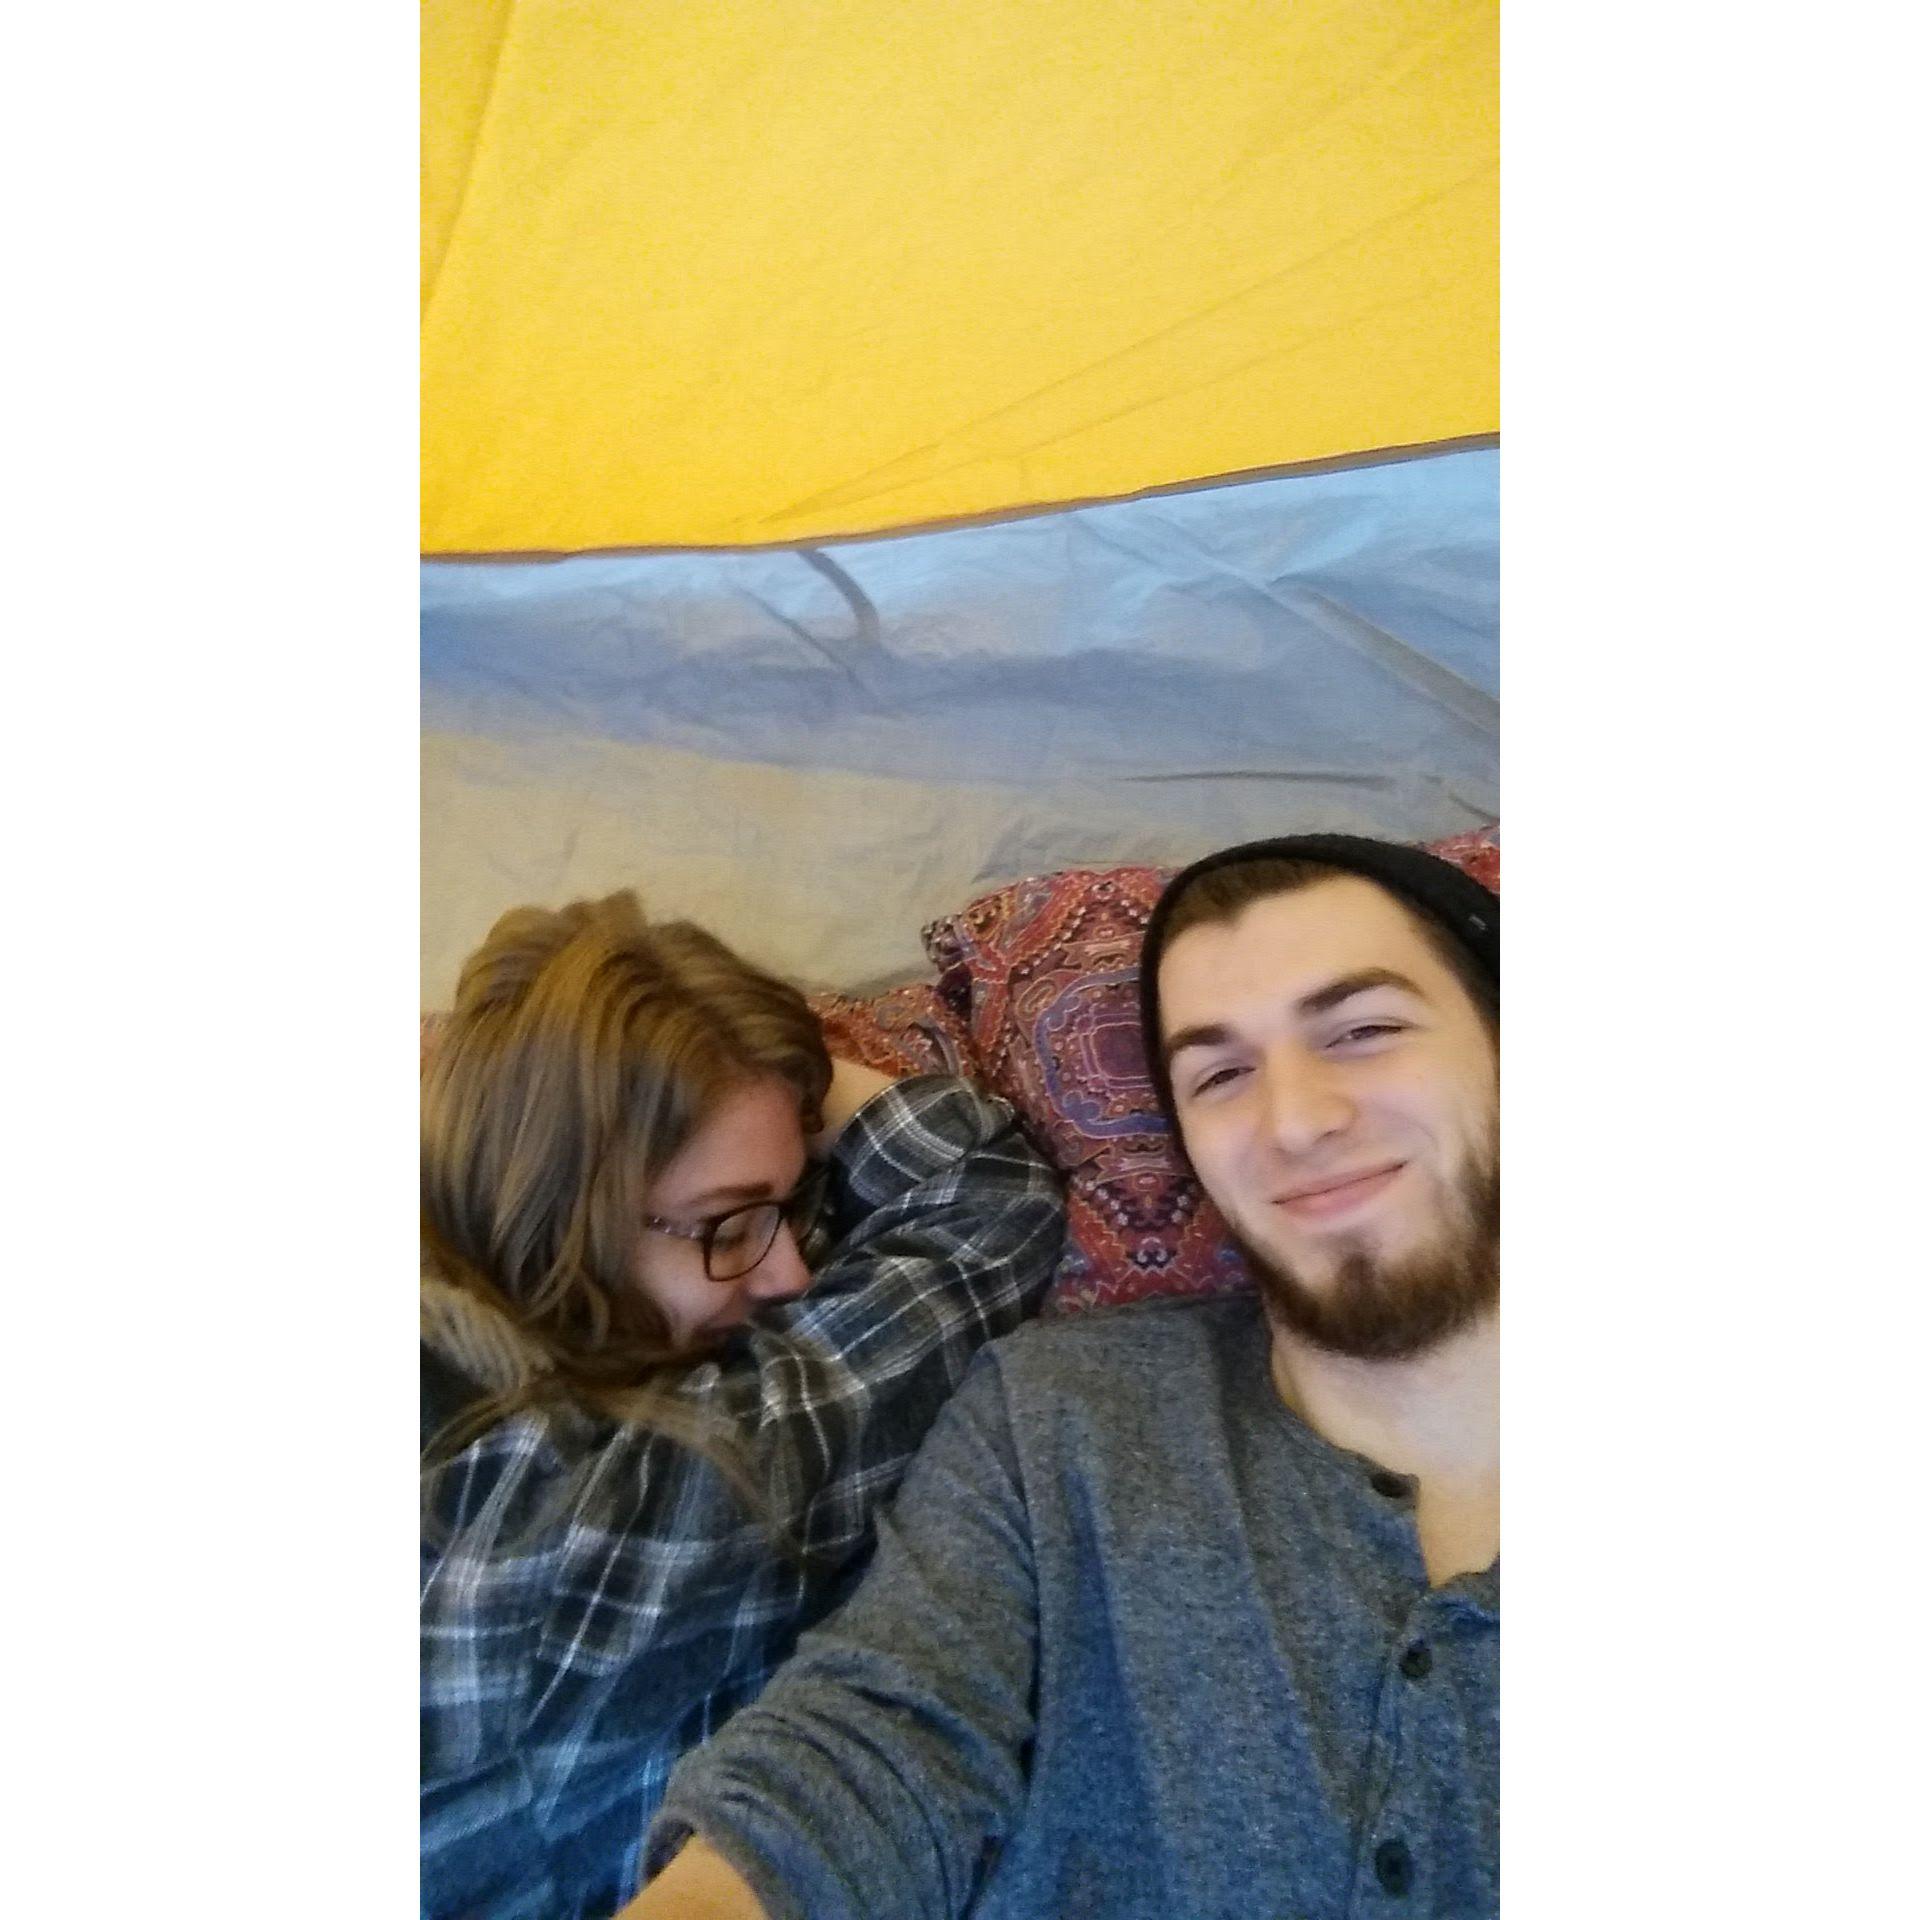 Our first camping trip together